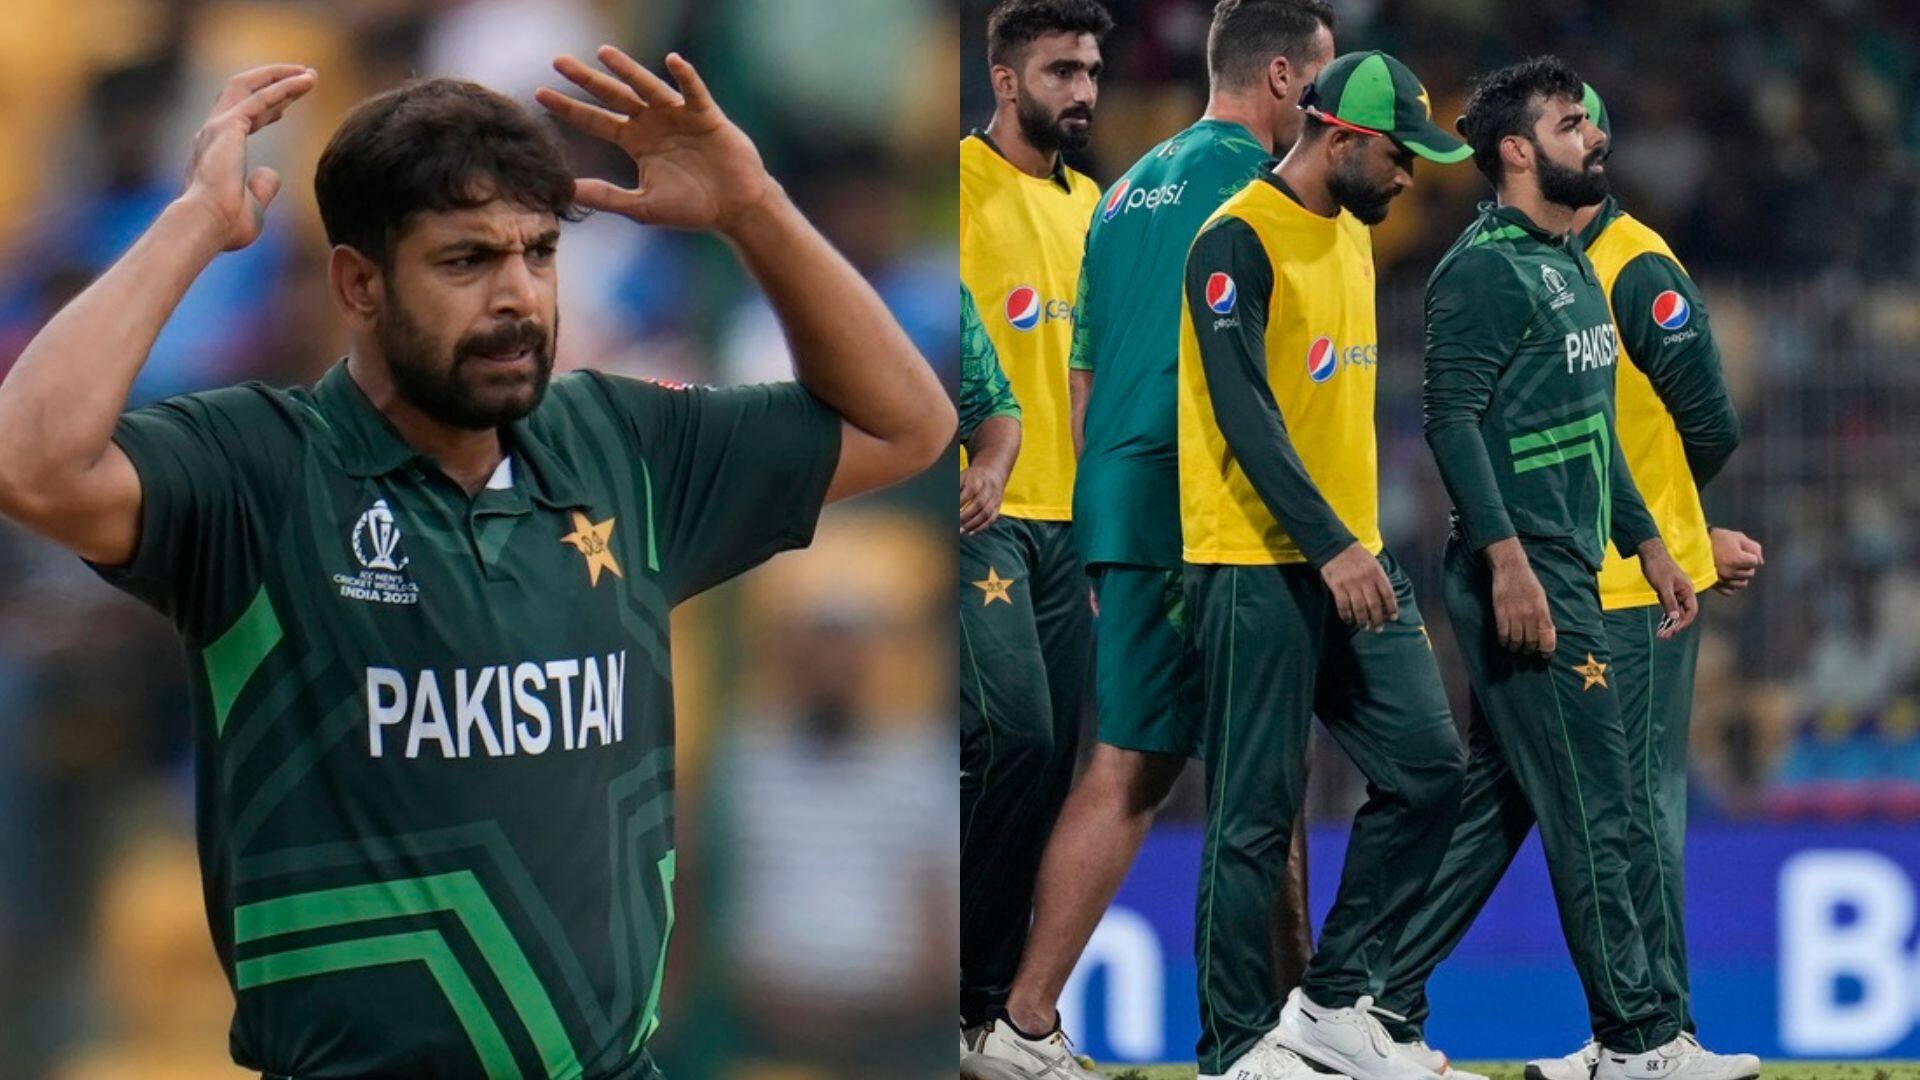 Haris Rauf, Shadab To Miss Pakistan’s Must-Win World Cup Match Vs ENG? Here’s Injury Updates